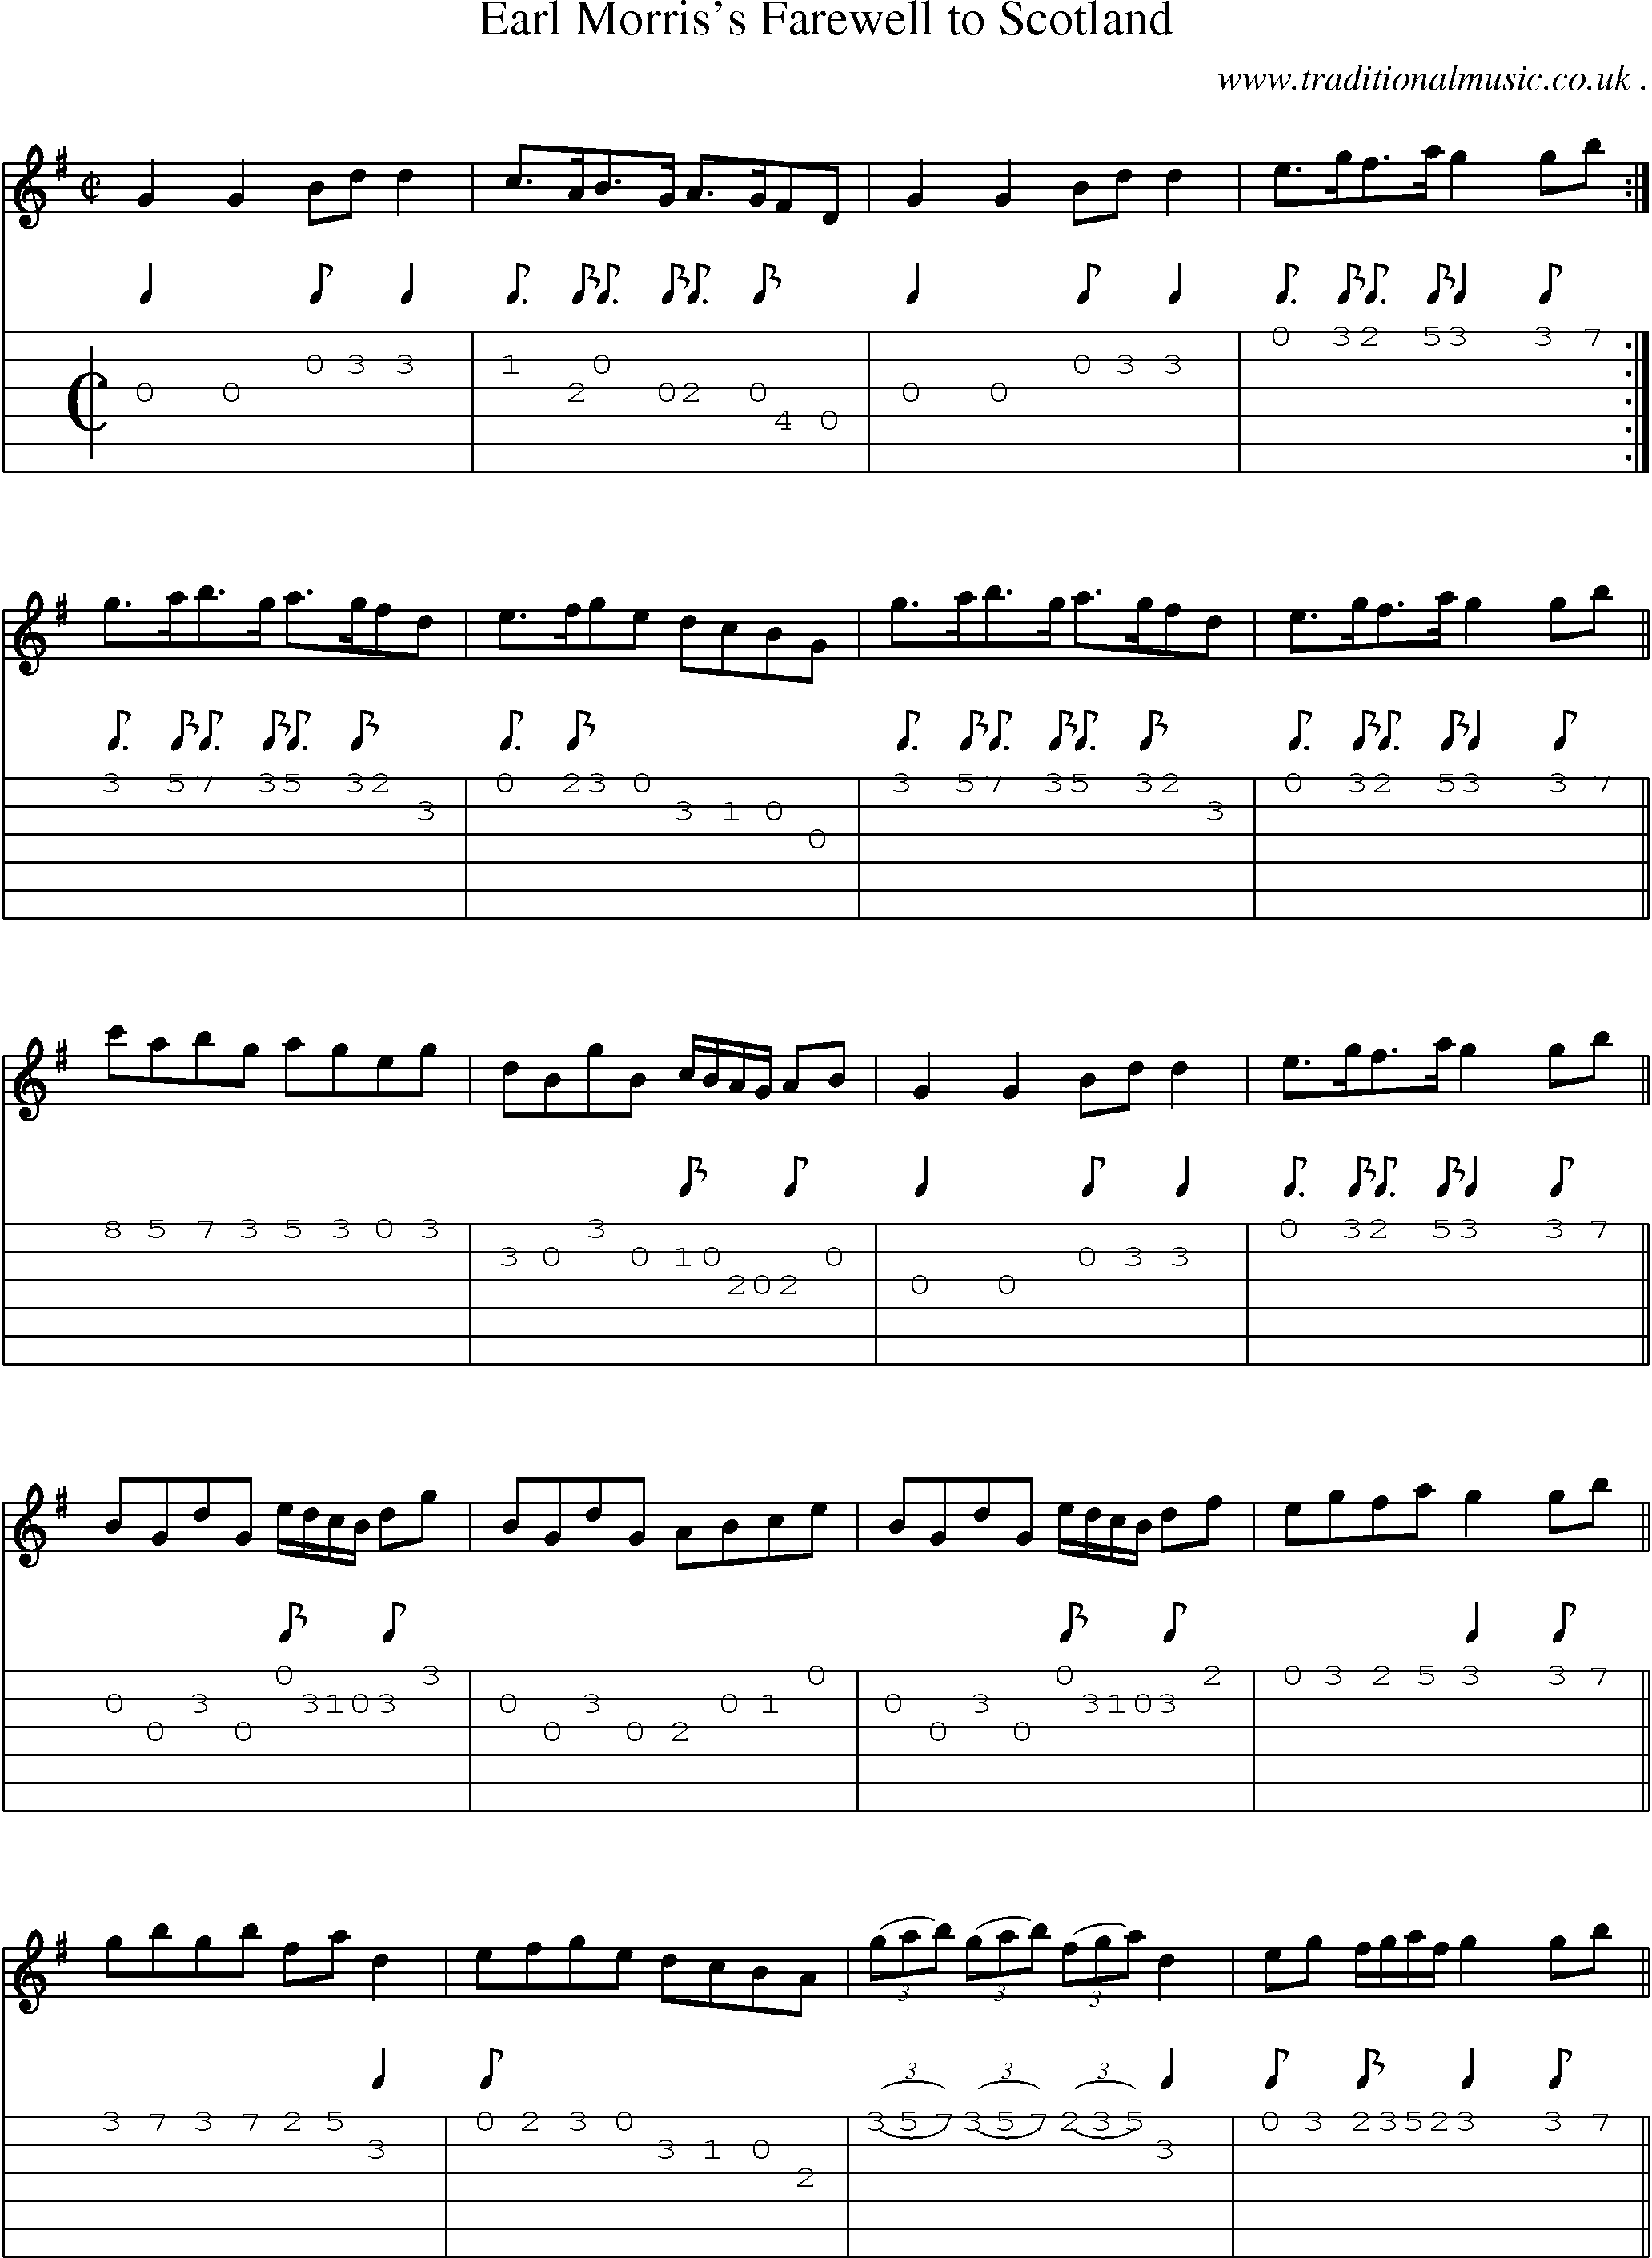 Sheet-Music and Guitar Tabs for Earl Morriss Farewell To Scotland